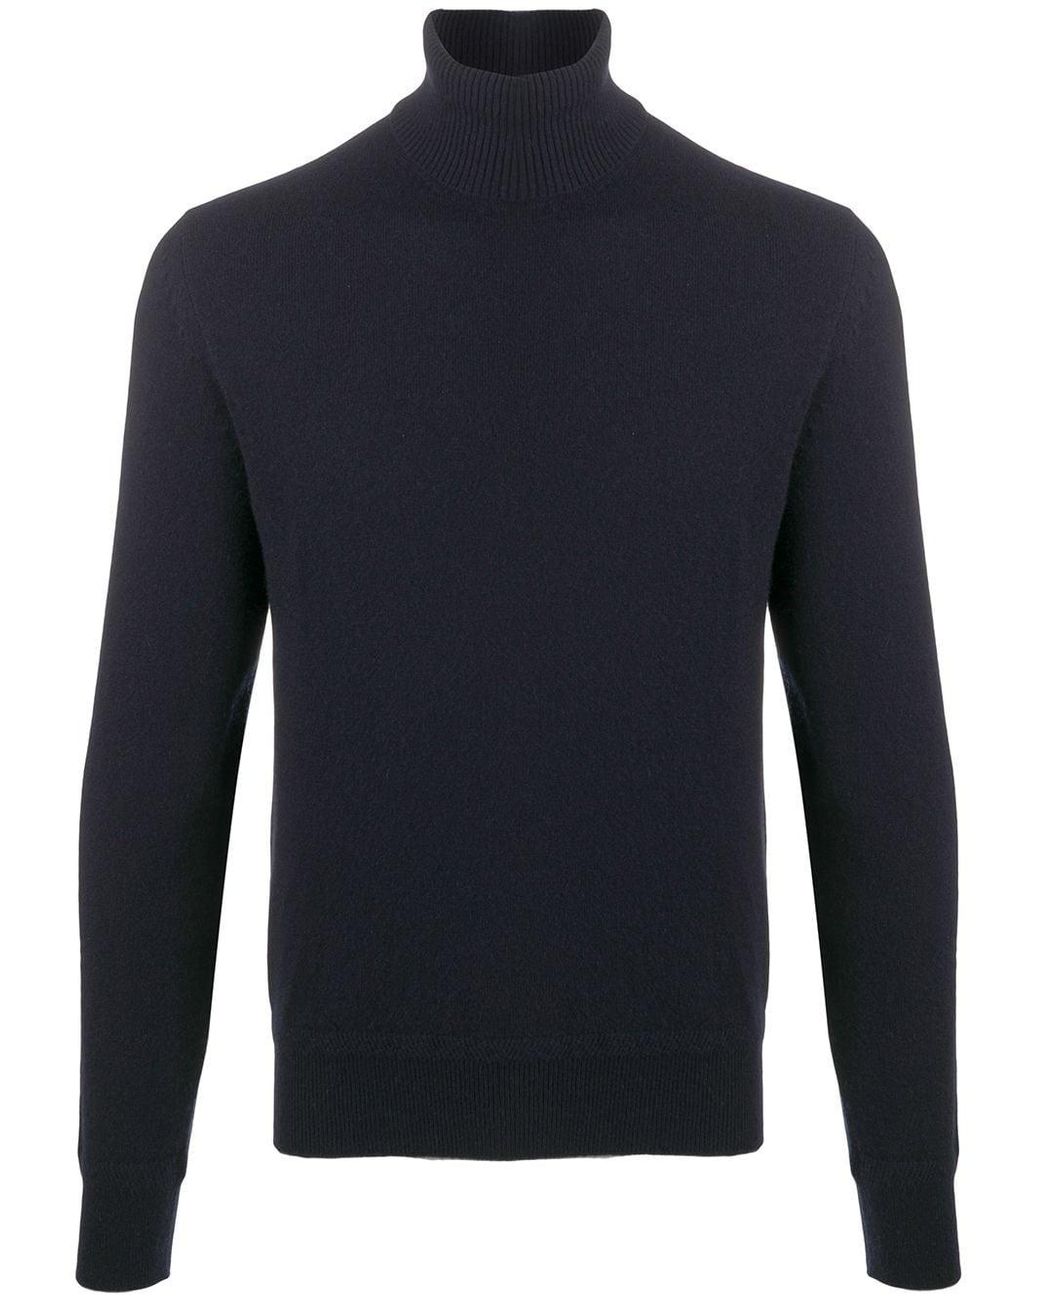 Tom Ford Cashmere Roll Neck Knitted Sweater in Blue for Men - Lyst